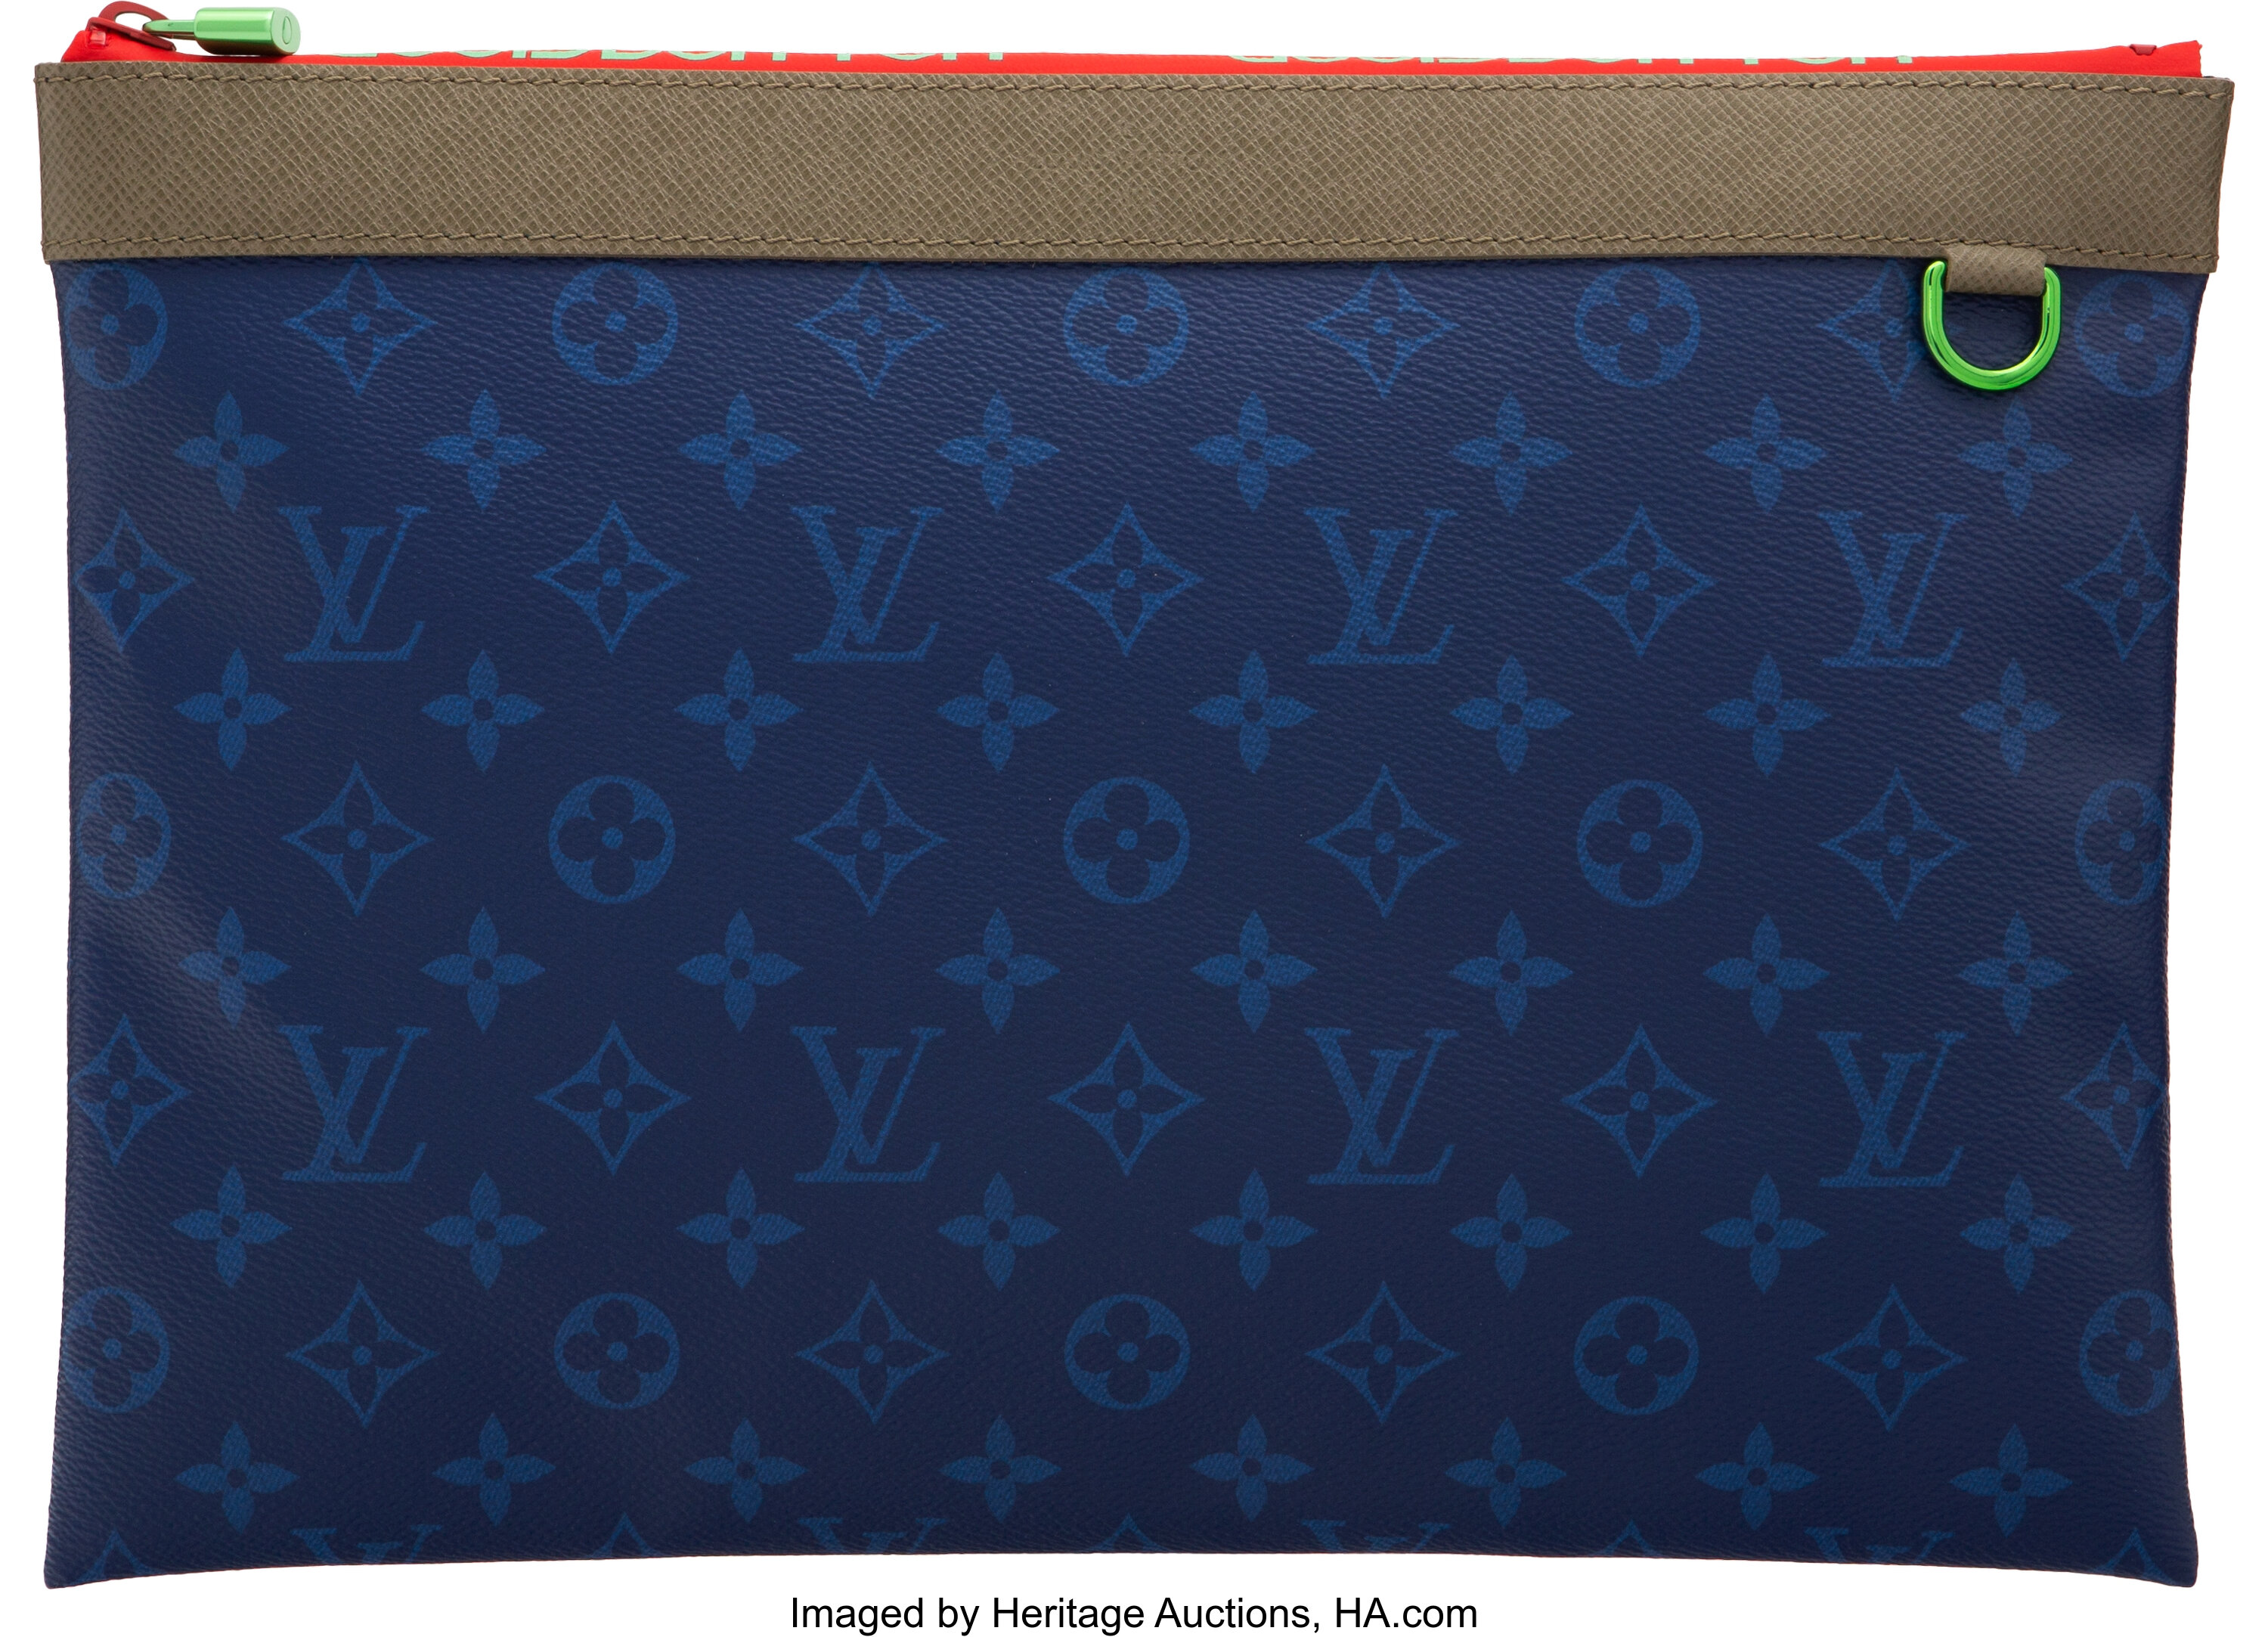 Louis Vuitton Limited Edition Pacific Blue Monogram Coated Canvas